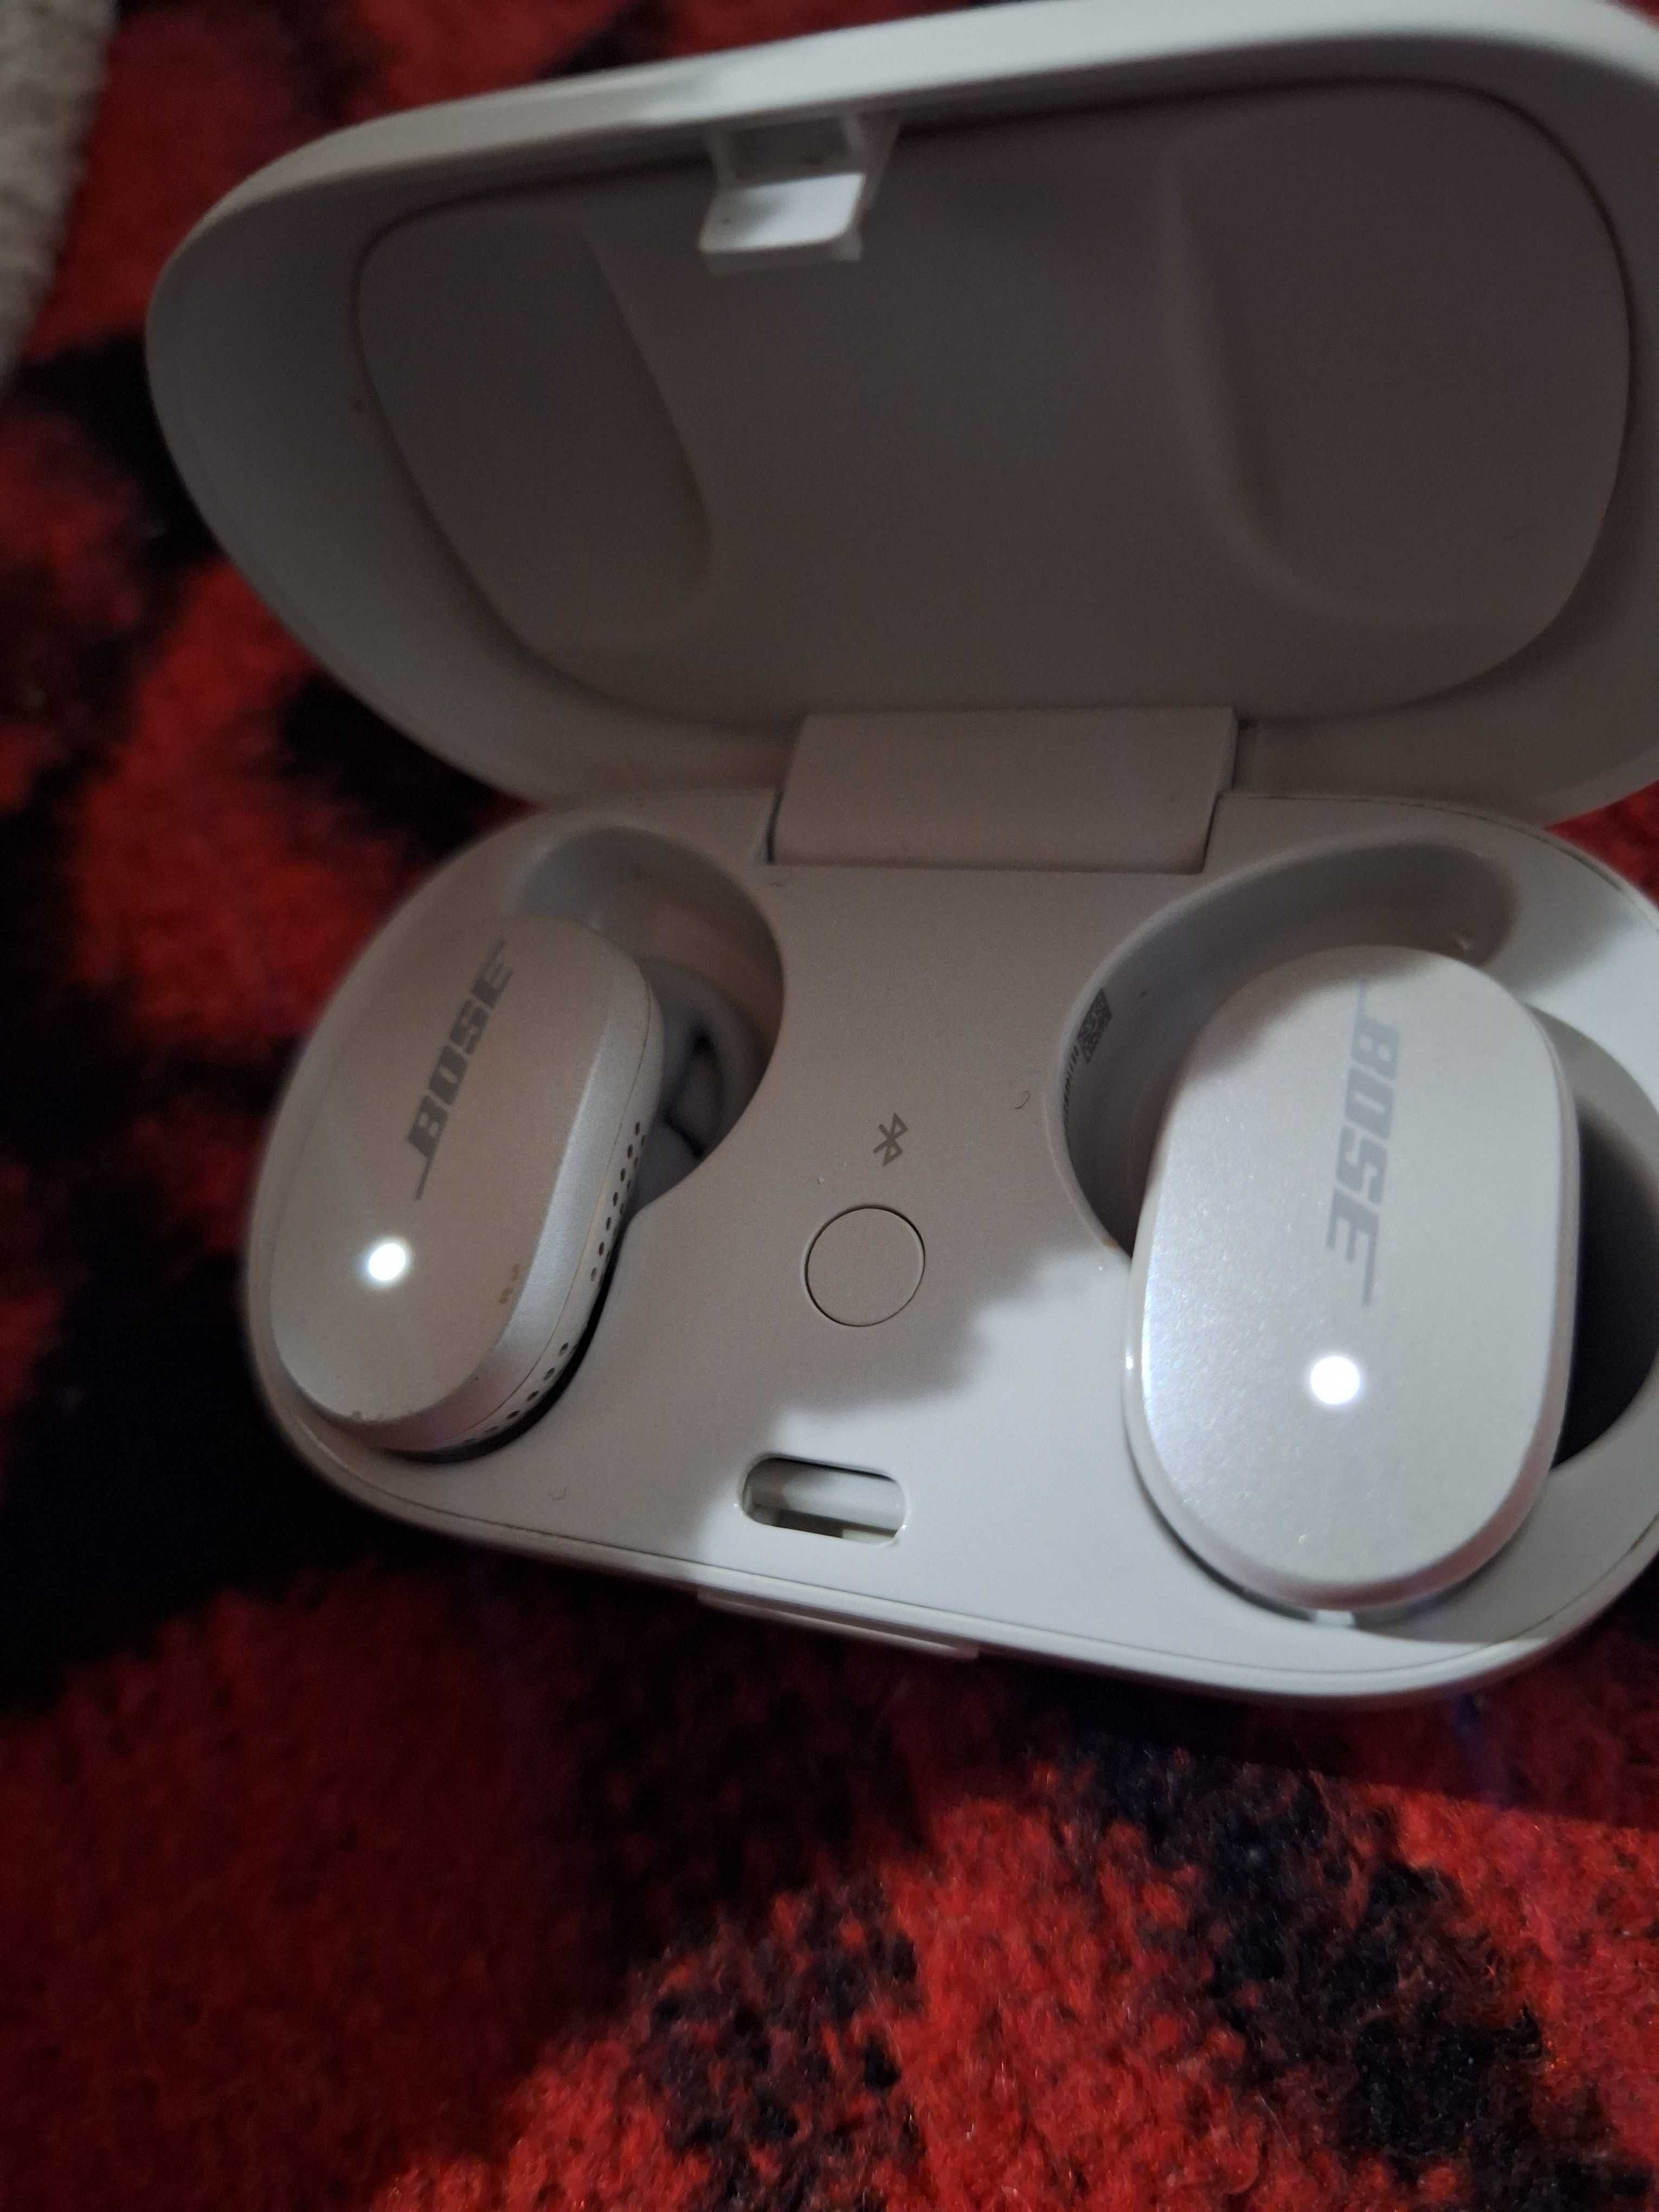 Bose qiute comfort with invoice and box